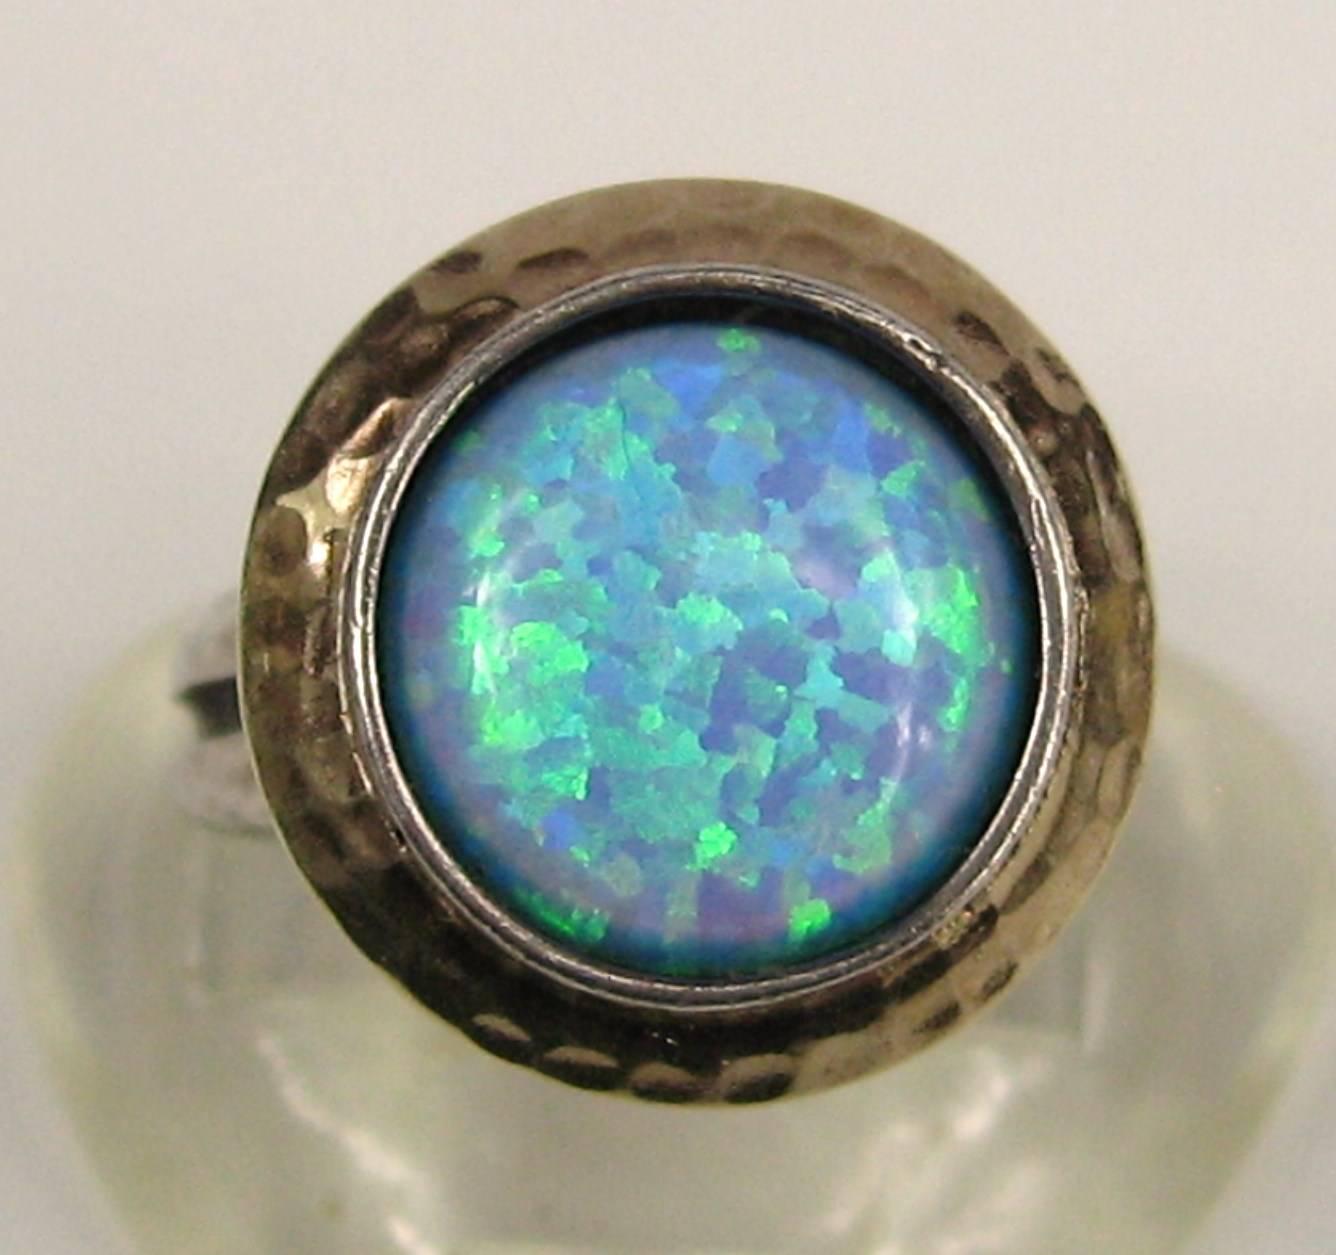 The colors in the opal are fabulous Bezel set in 14K Gold and set in a sterling silver ring Table of ring measures .66 in diameter and stands .55 high Size 6.5  and can be sized by your jeweler or ours. This is out of a massive collection of Hopi,